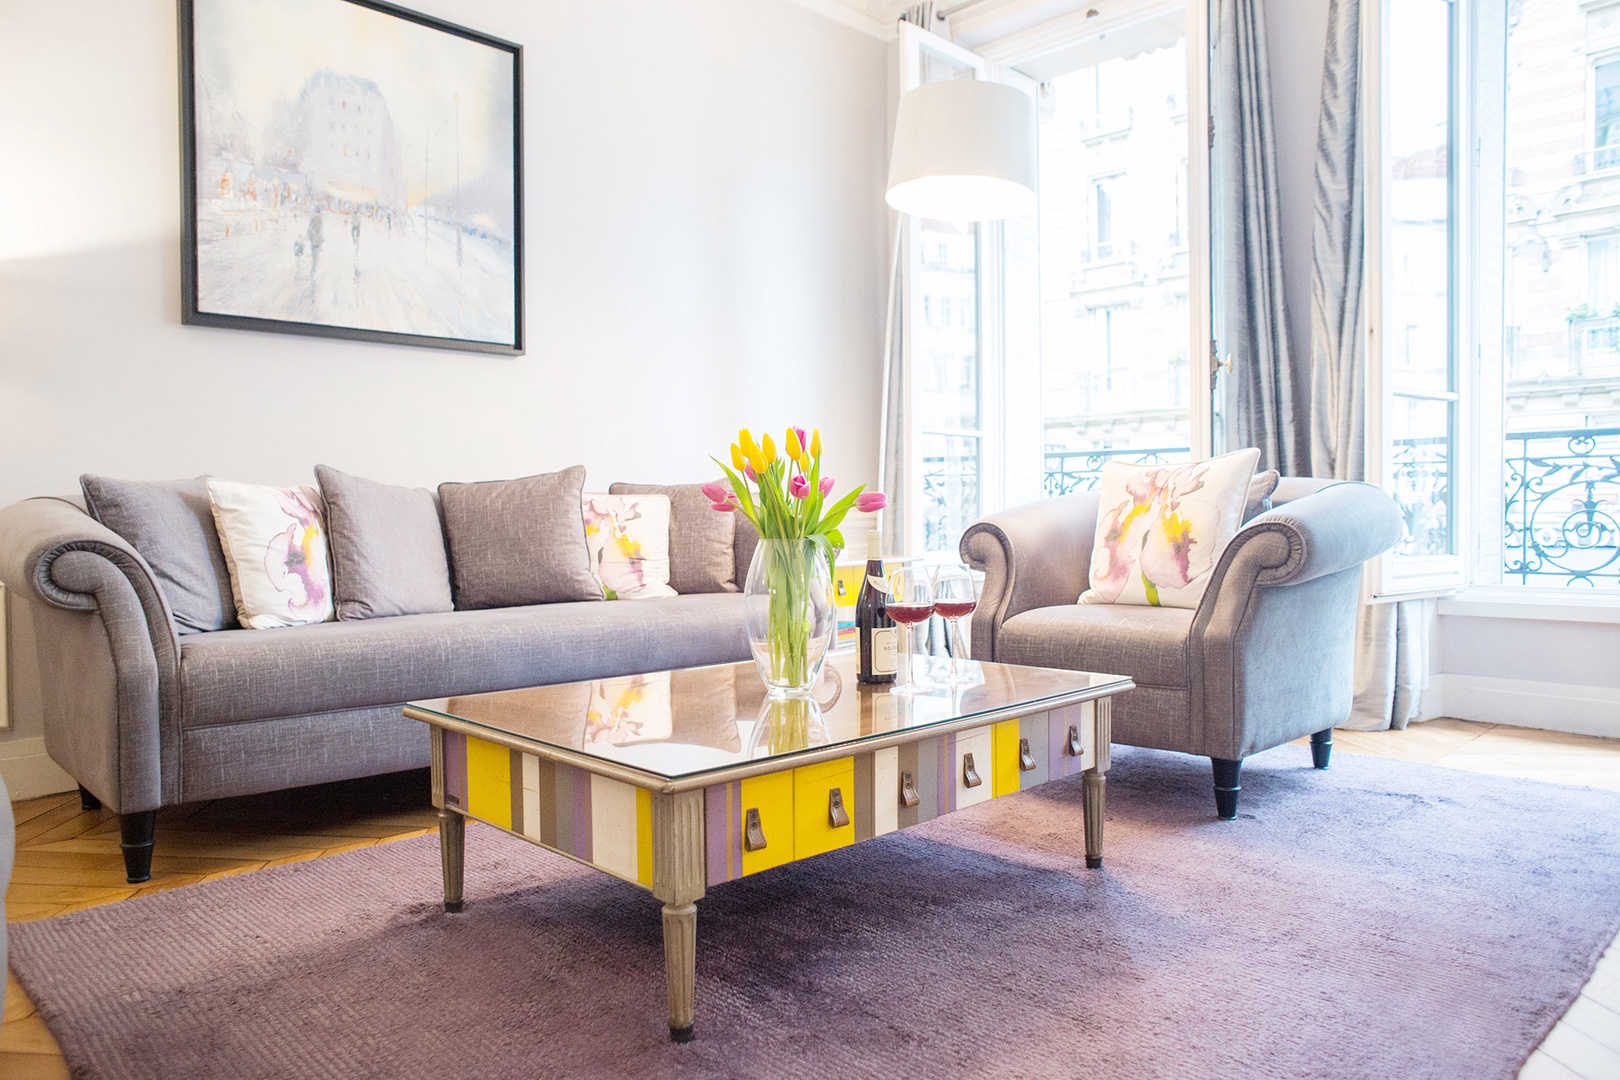 Welcome to our bright and beautiful Maubert rental!